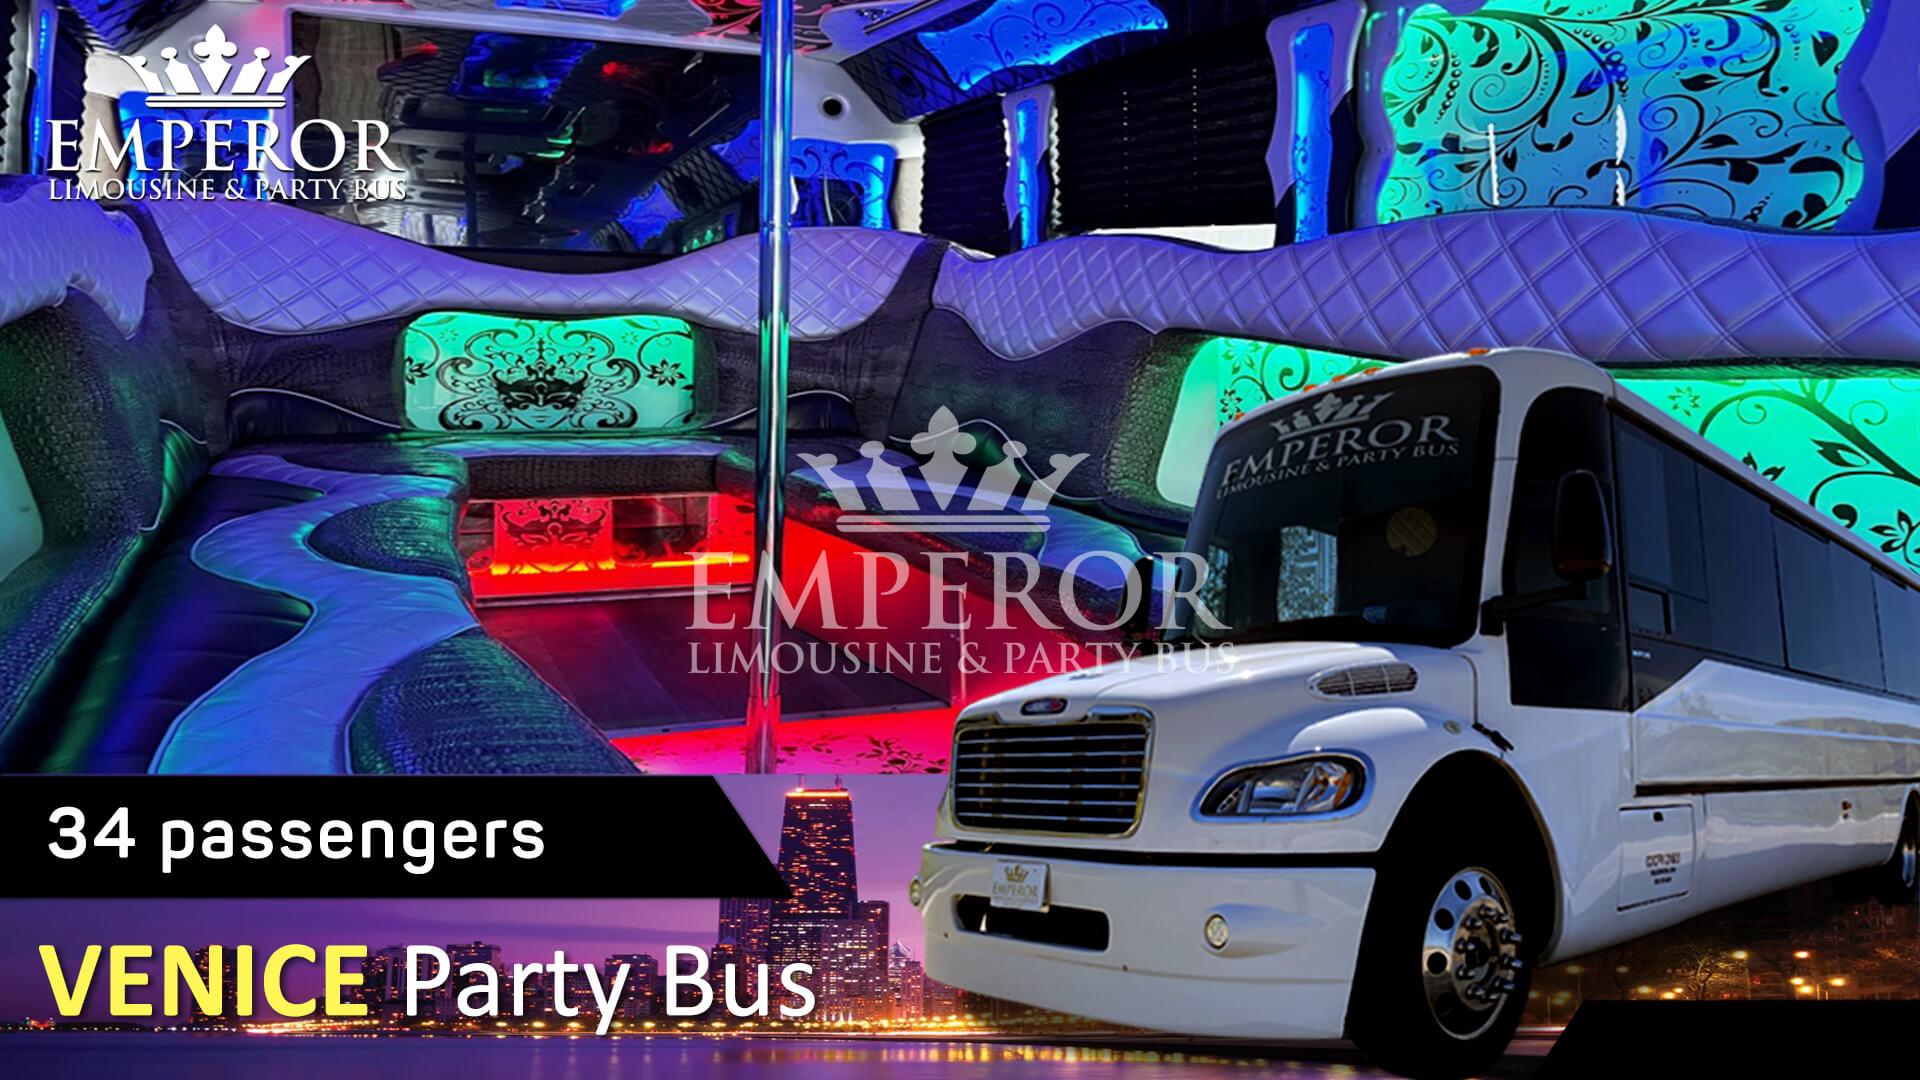 Best party buses for Bachelorette party in Chicago - Venice Edition